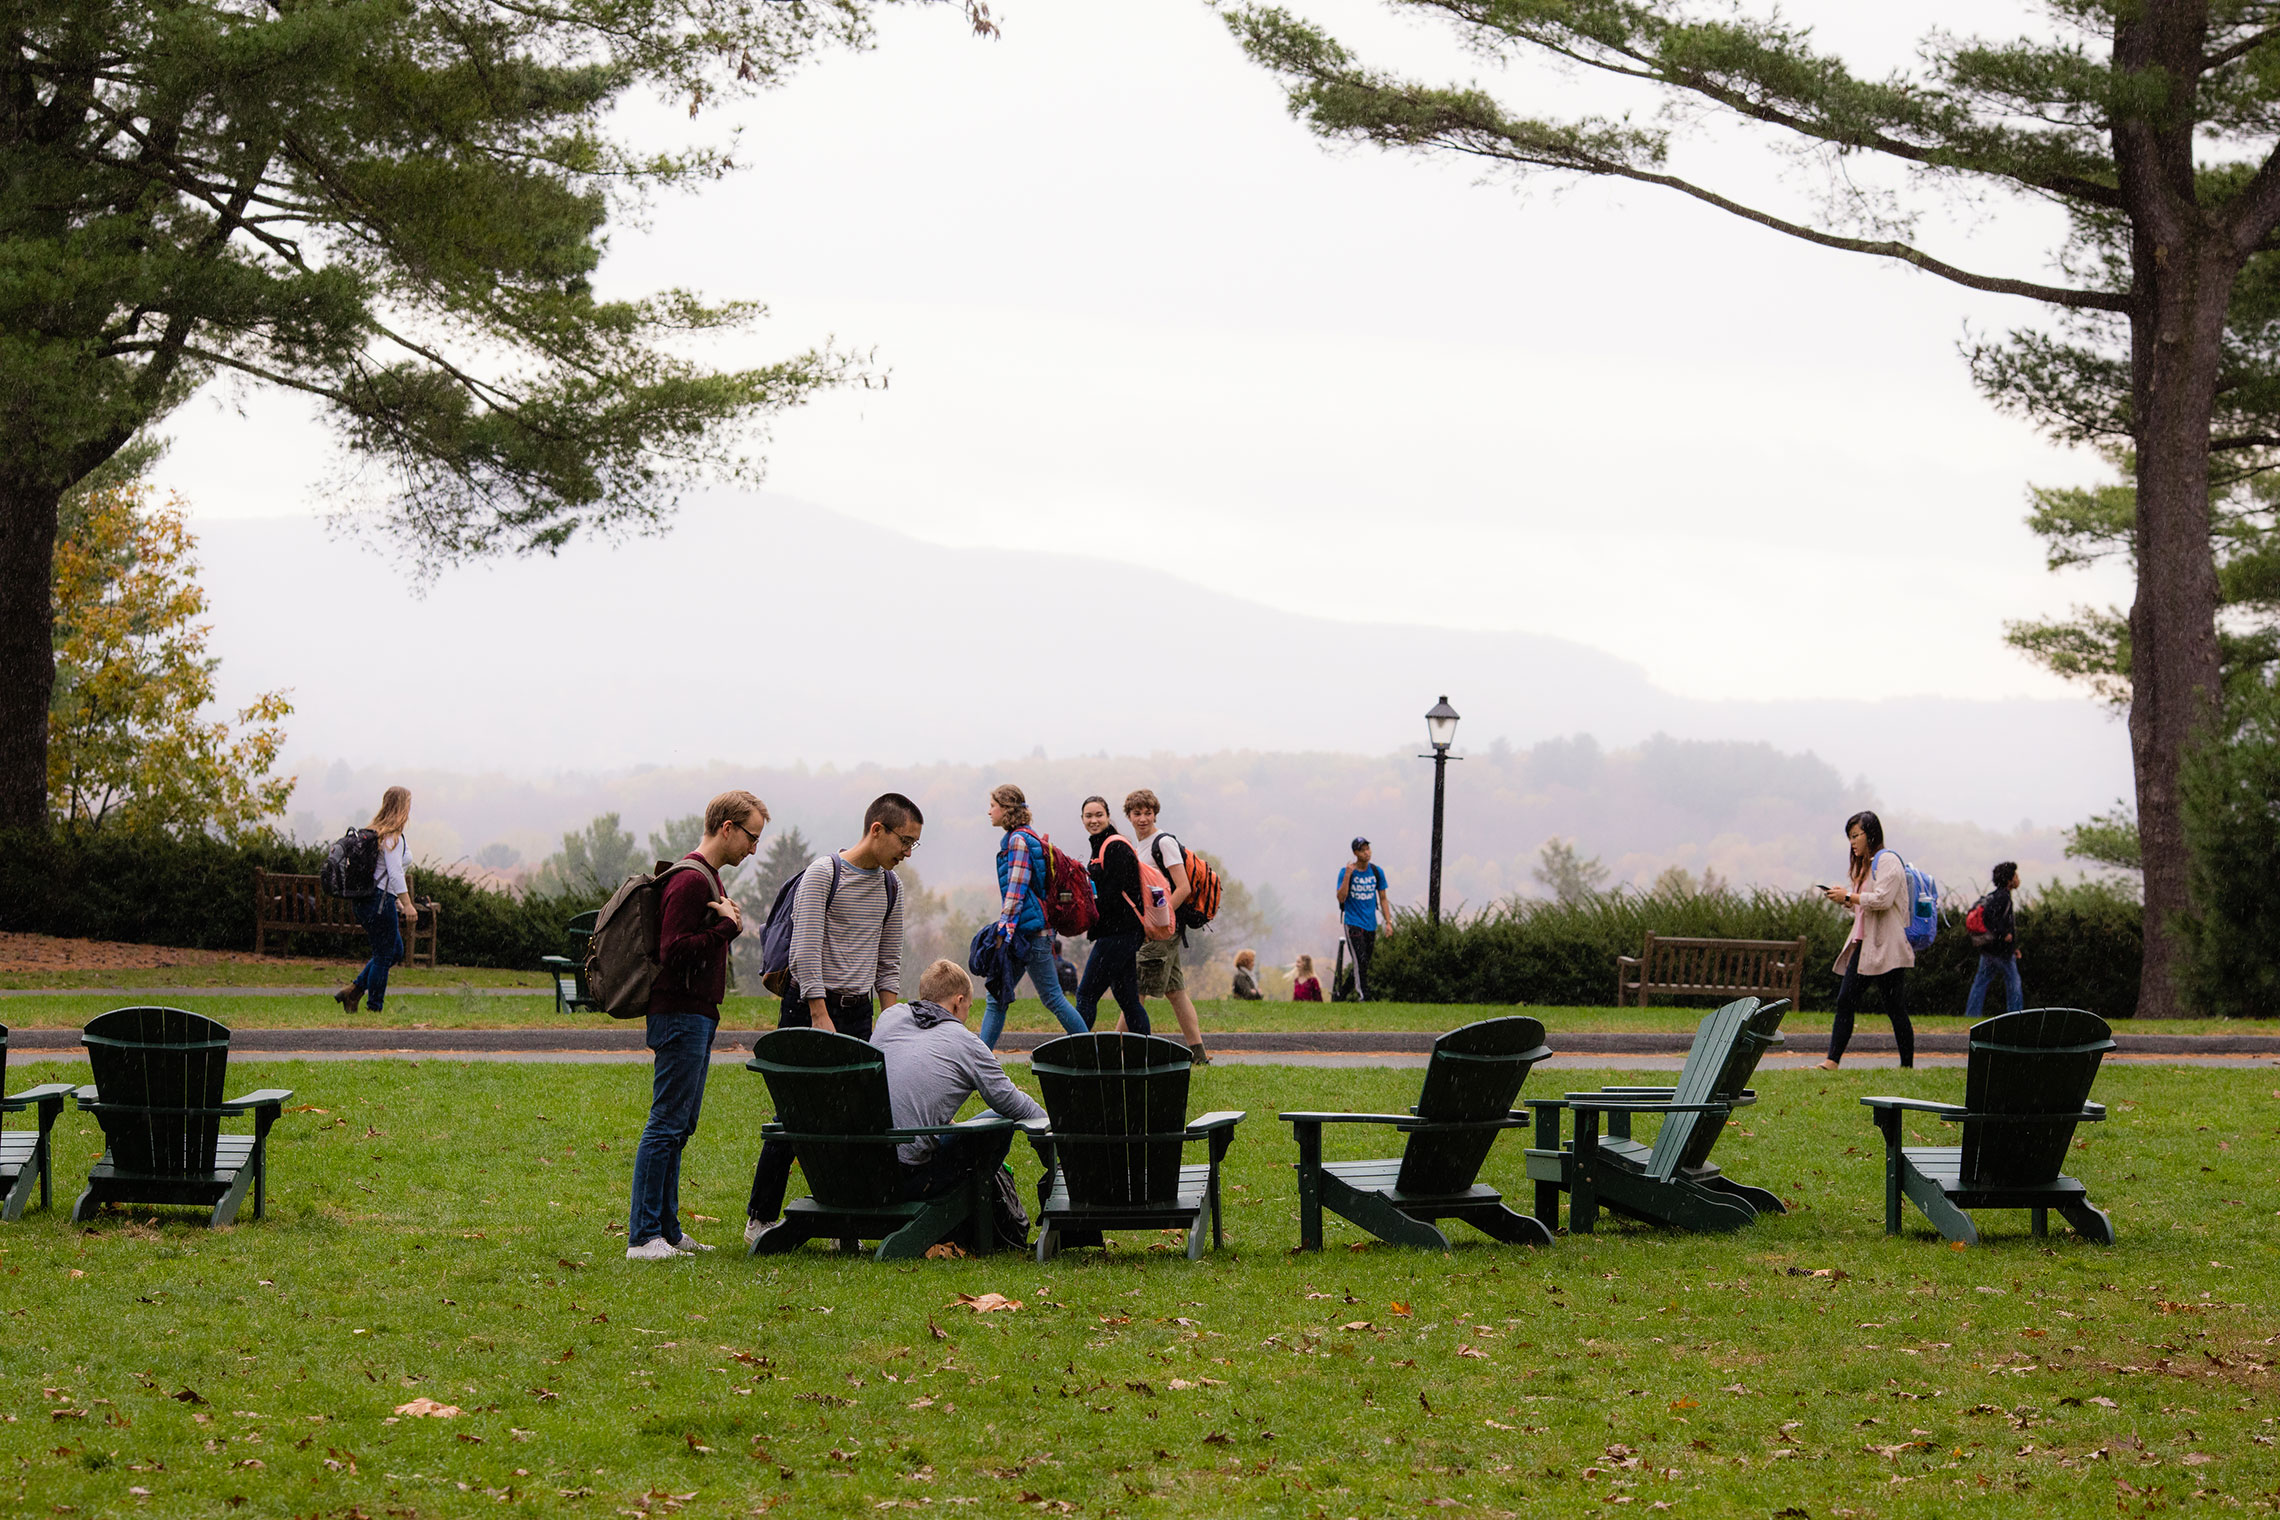 Students on the Academic Quad at Amherst College.